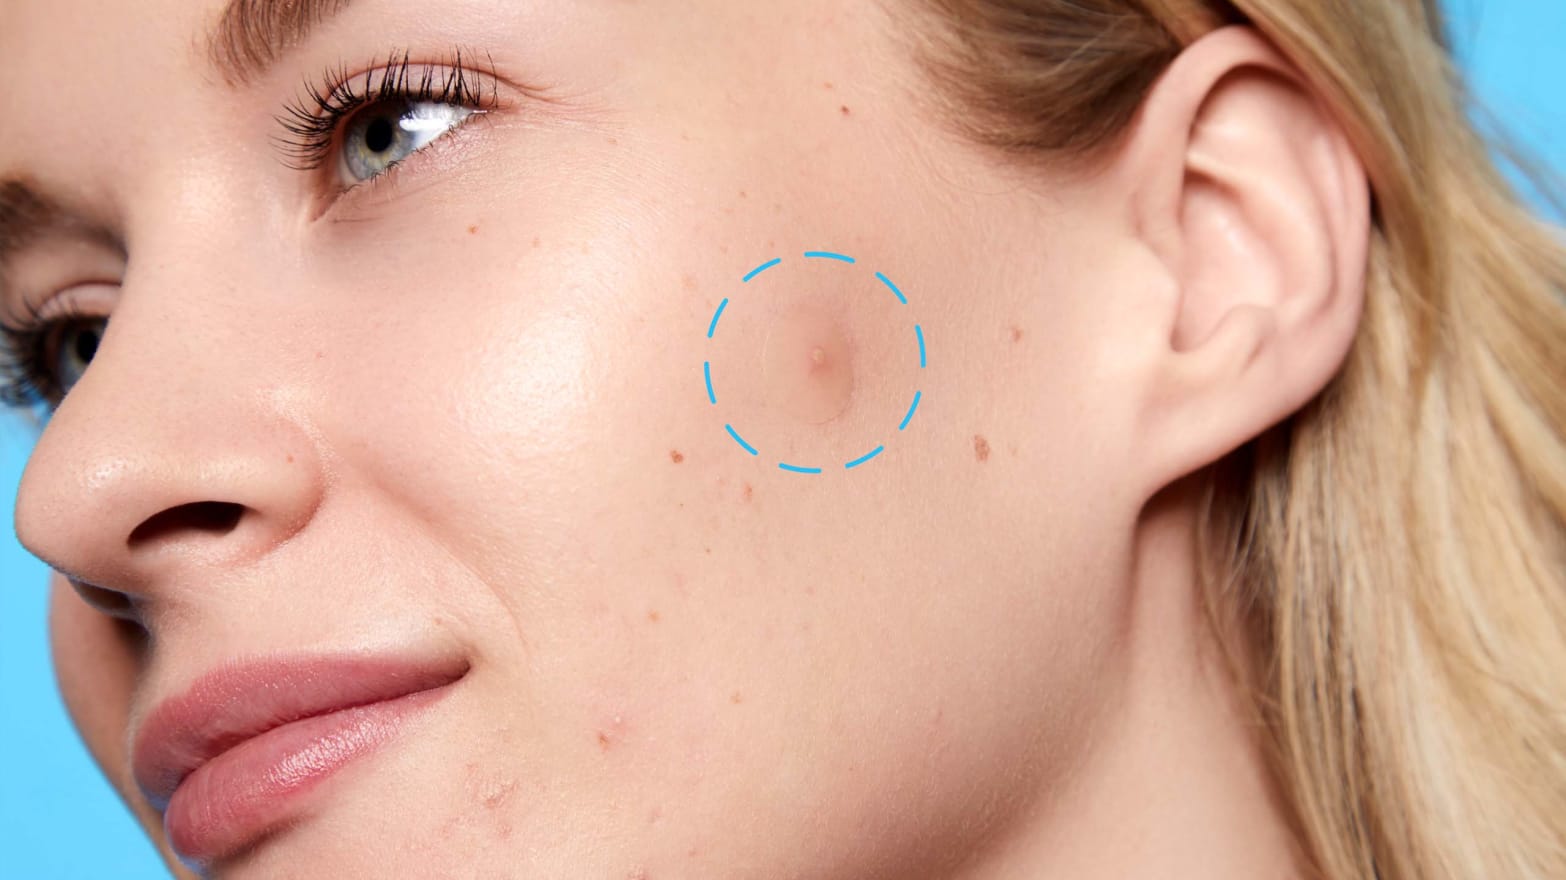 These $12 Pimple Patches Made My Cystic Acne Disappear Overnight